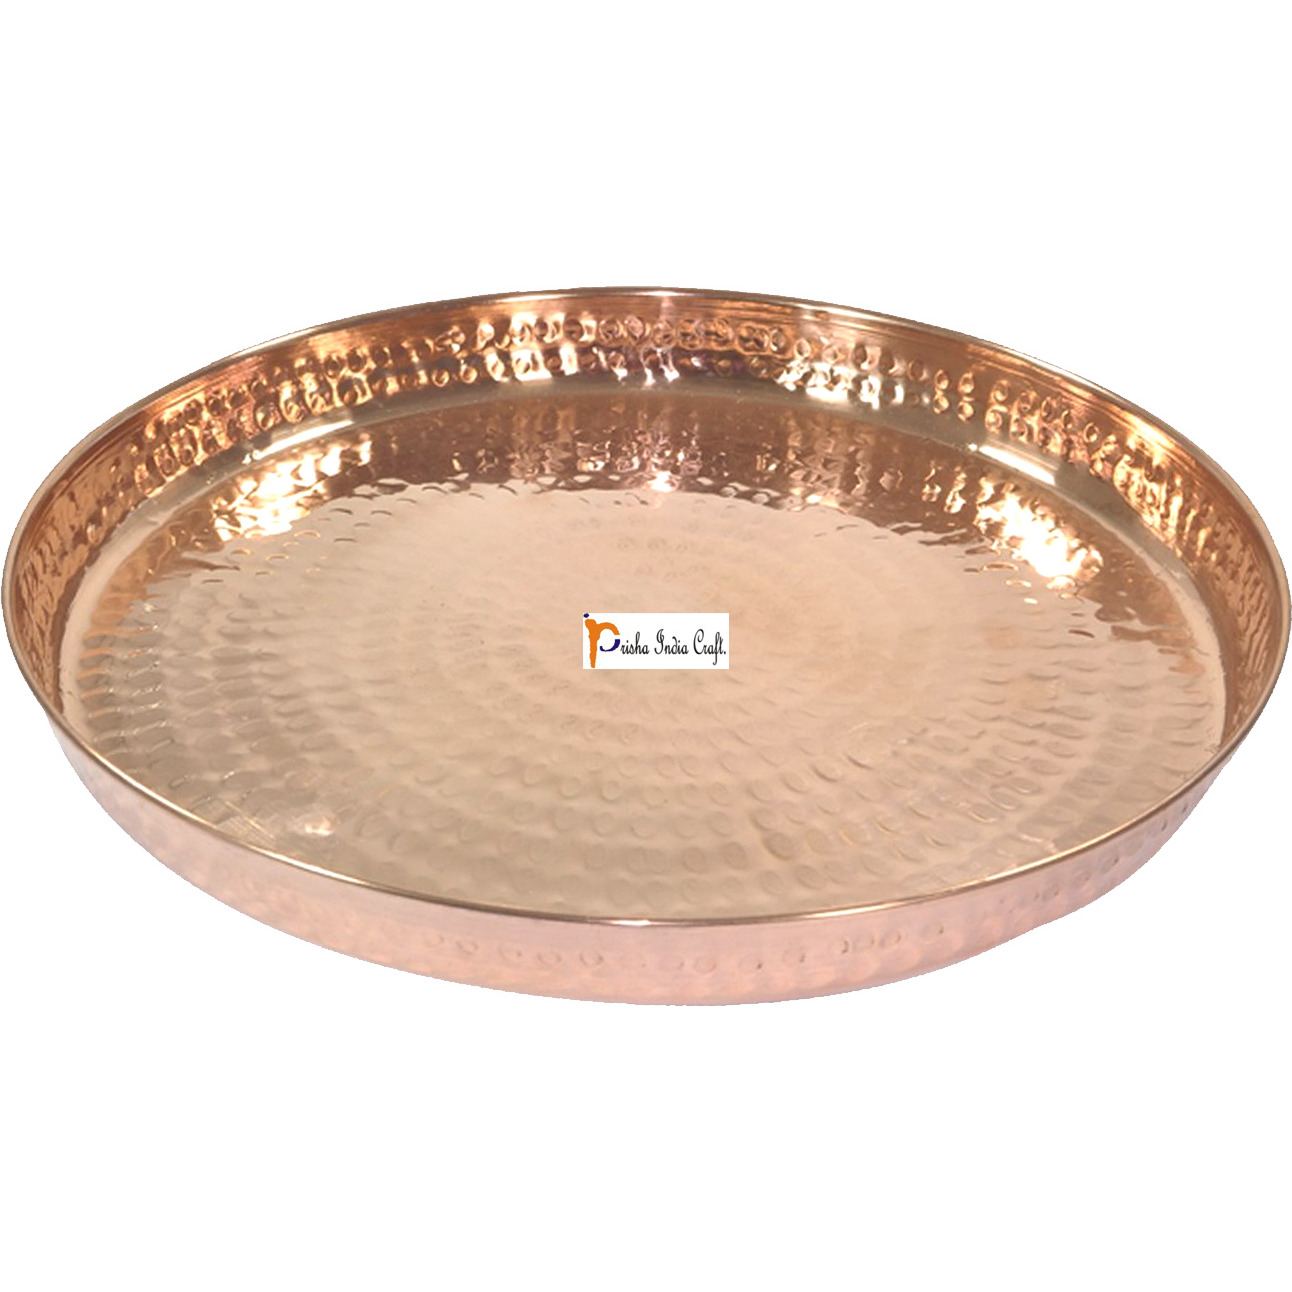 Set of 2 Prisha India Craft B. Indian Dinnerware Pure Copper Thali Set Dia 12  Traditional Dinner Set of Plate, Bowl, Spoons, Glass with Napkin ring and Coaster - Christmas Gift